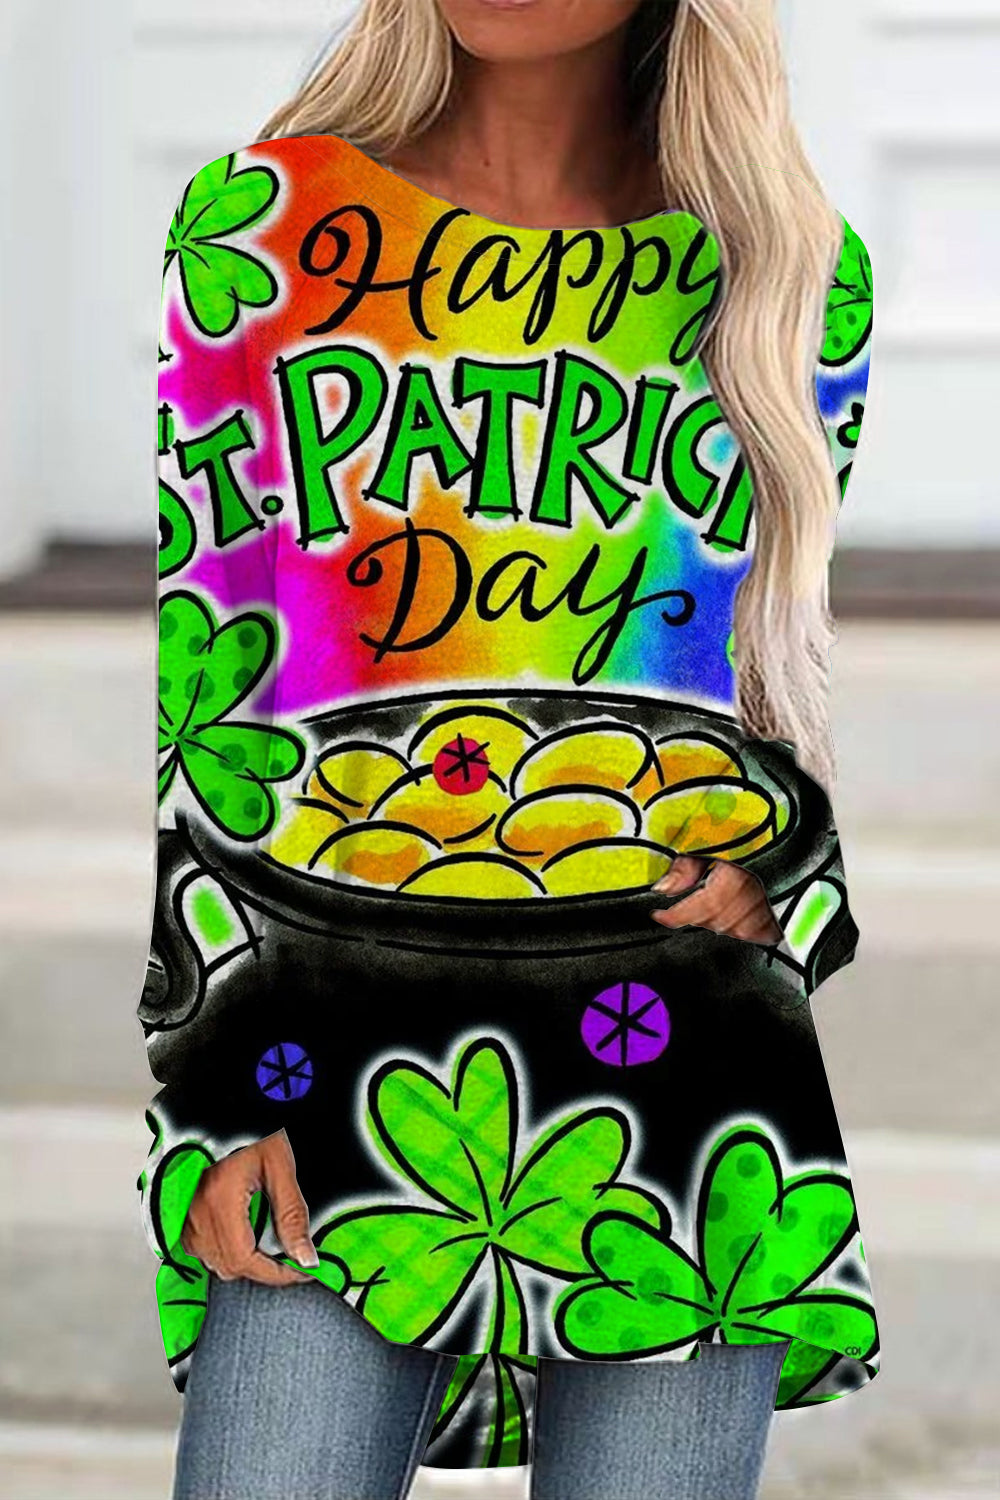 Happy St.Patrick's Day Children's Illustration Hand-Painted Printed Tunic